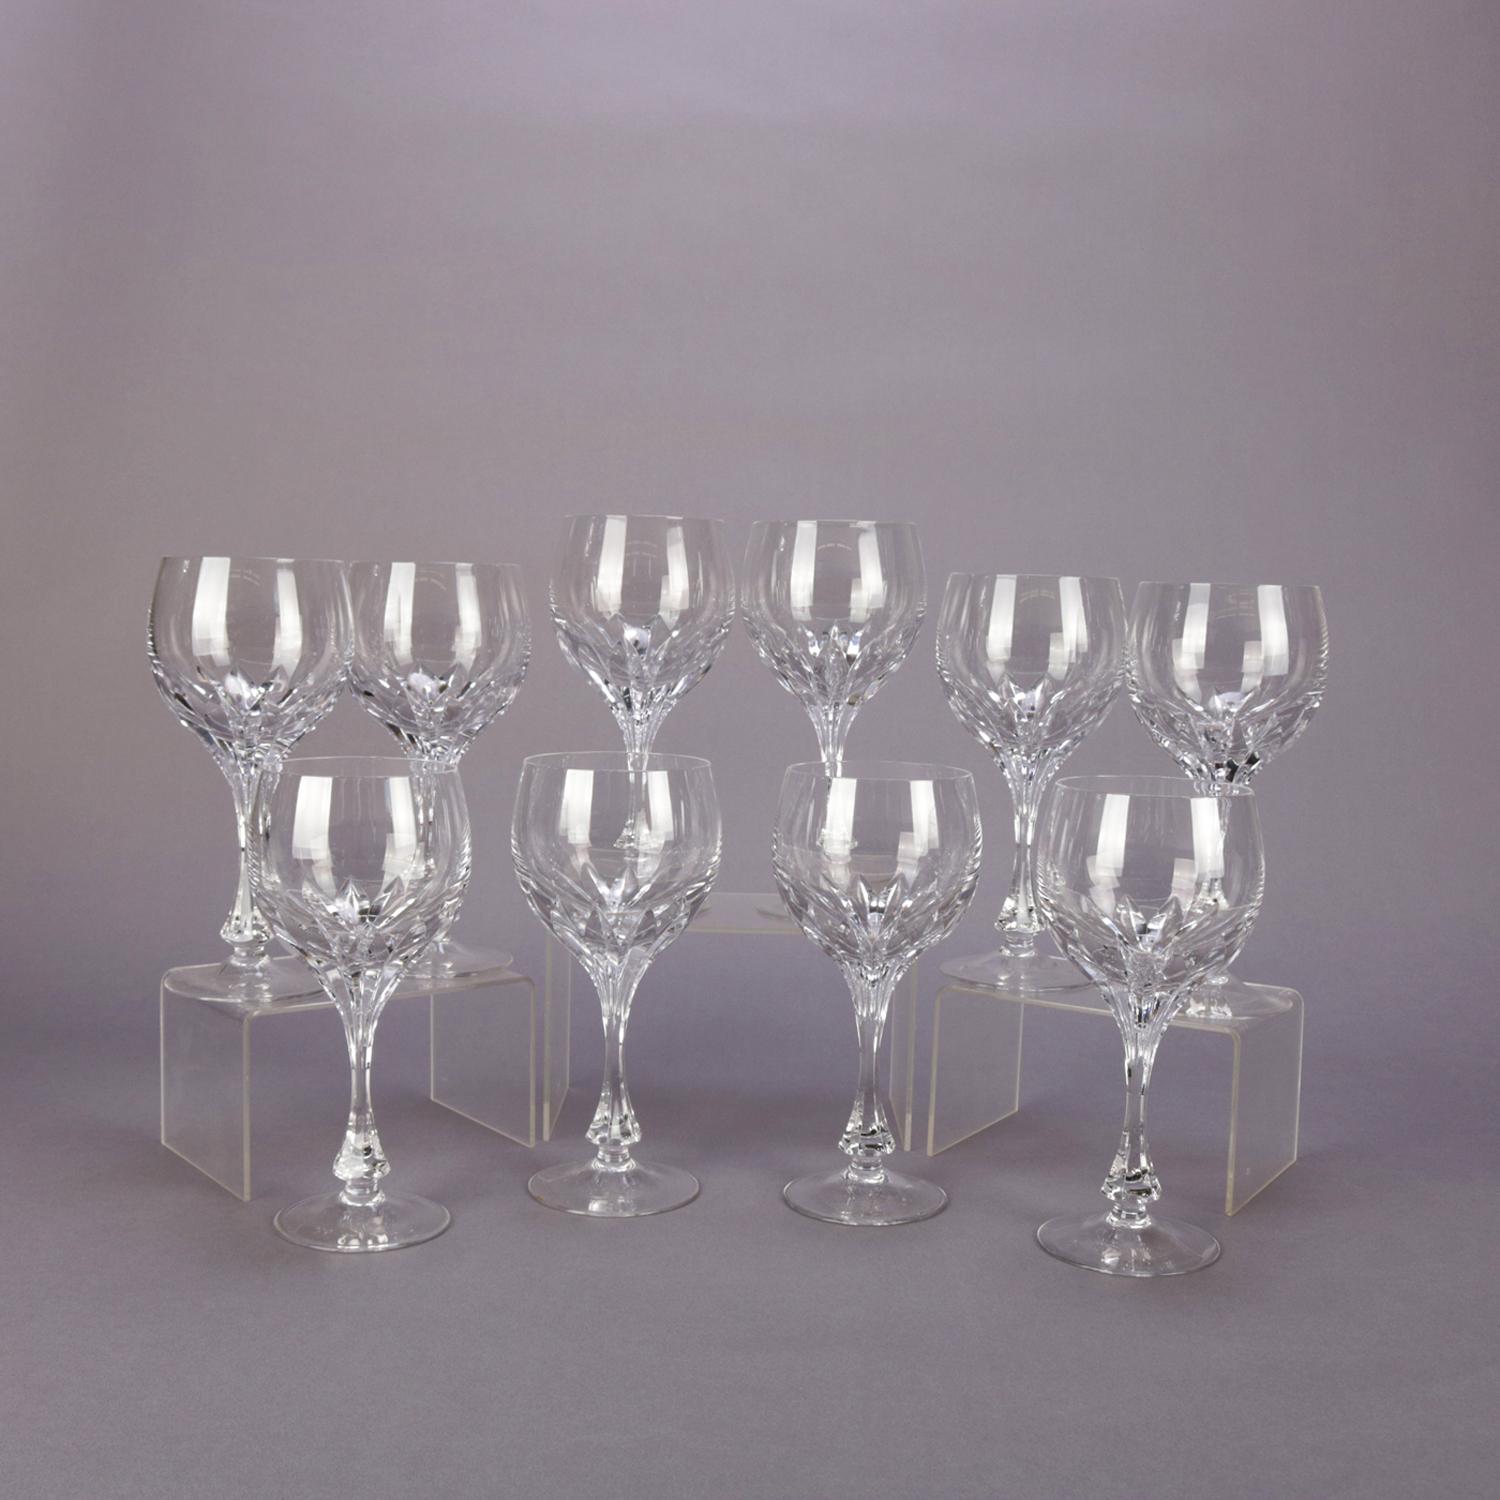 Set of 10 cut crystal burgundy wine goblets by Gorham feature Isabella pattern having vertical cut pattern on lower half of the bowl and raised on faceted and flared stems, Gorham mark visible on one glass, circa 1950.

***DELIVERY NOTICE – Due to